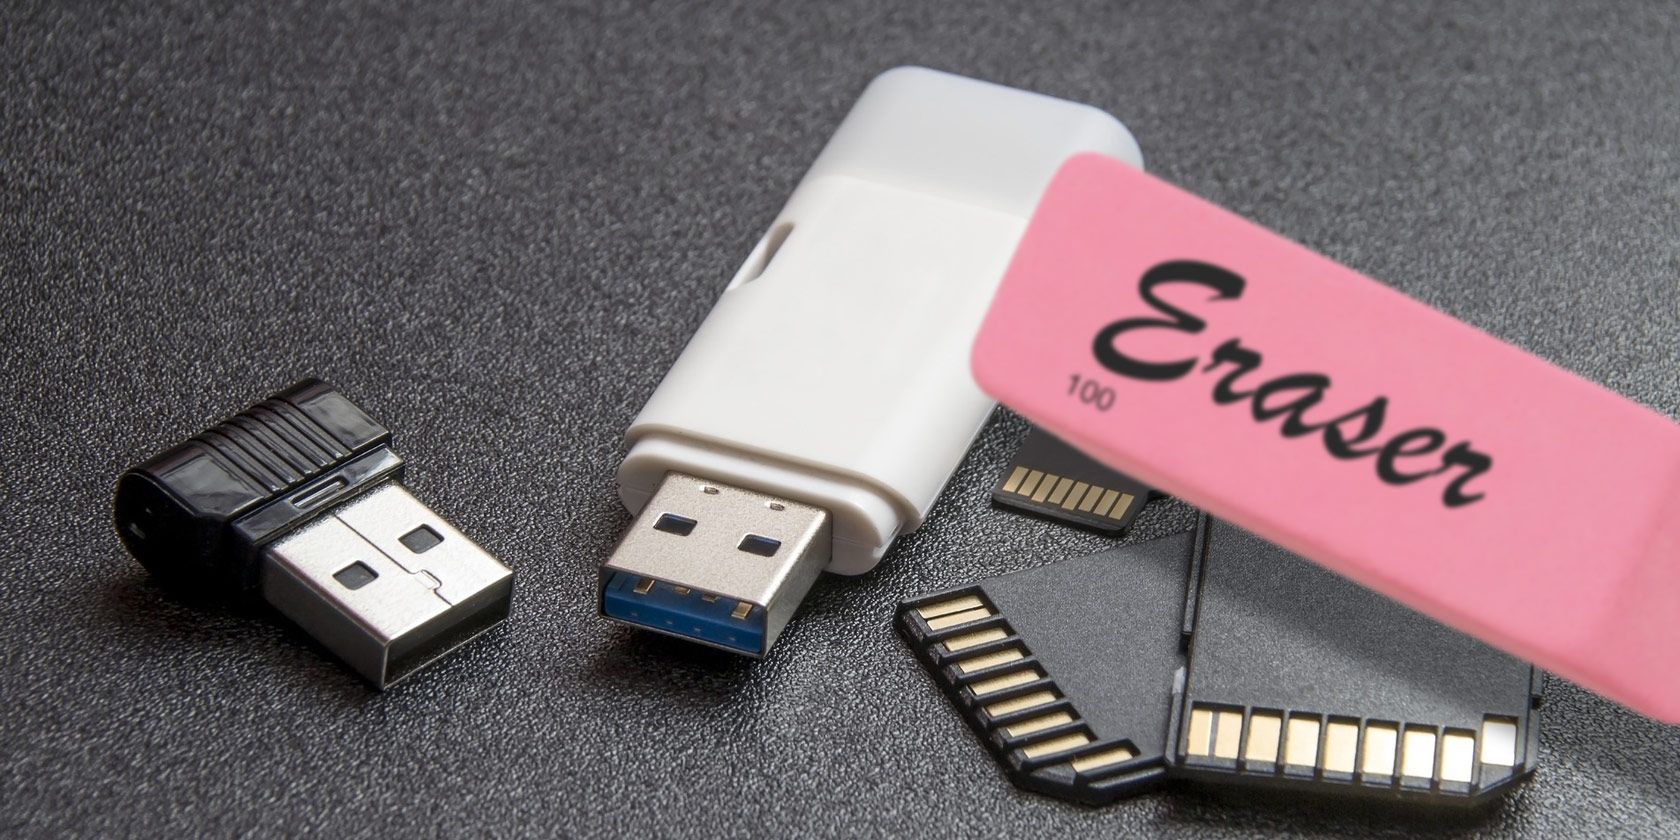 how to erase a flash drive